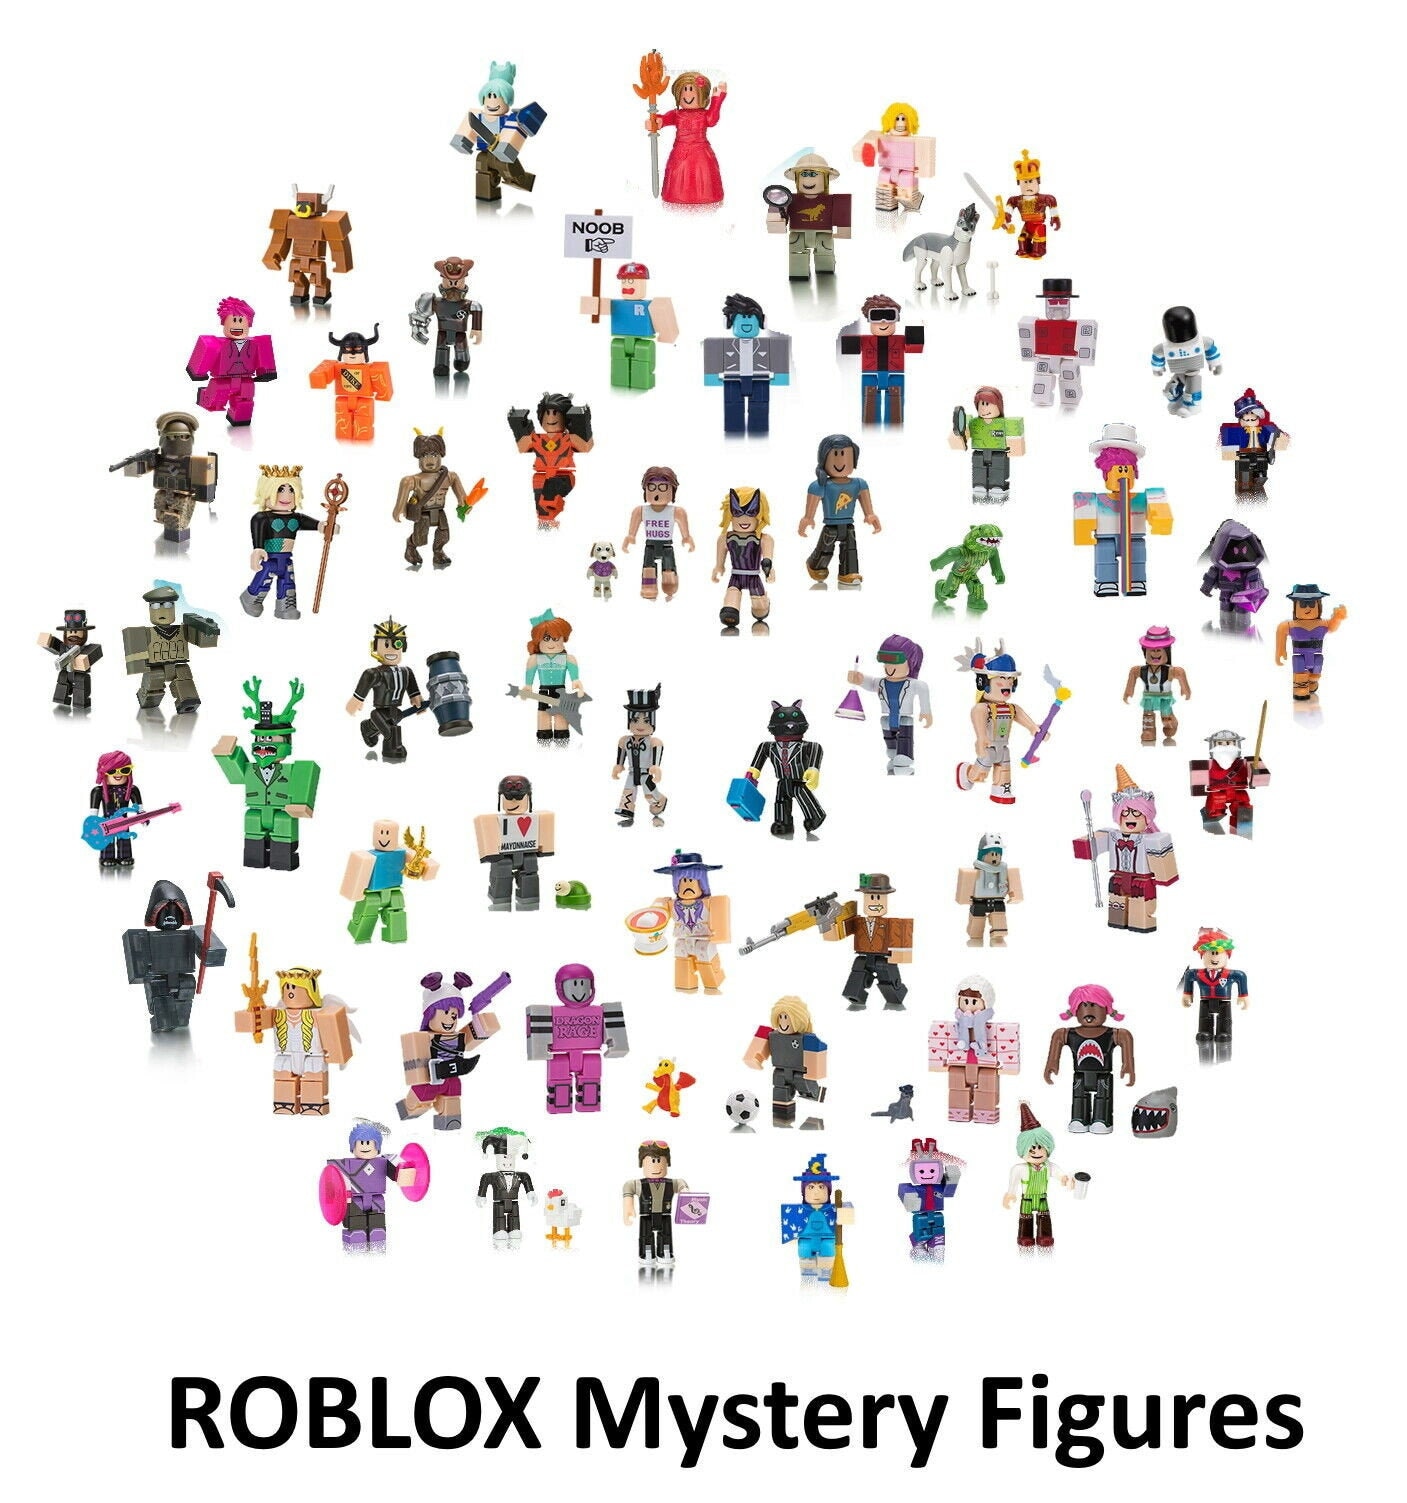 Pin on Roblox giveaway